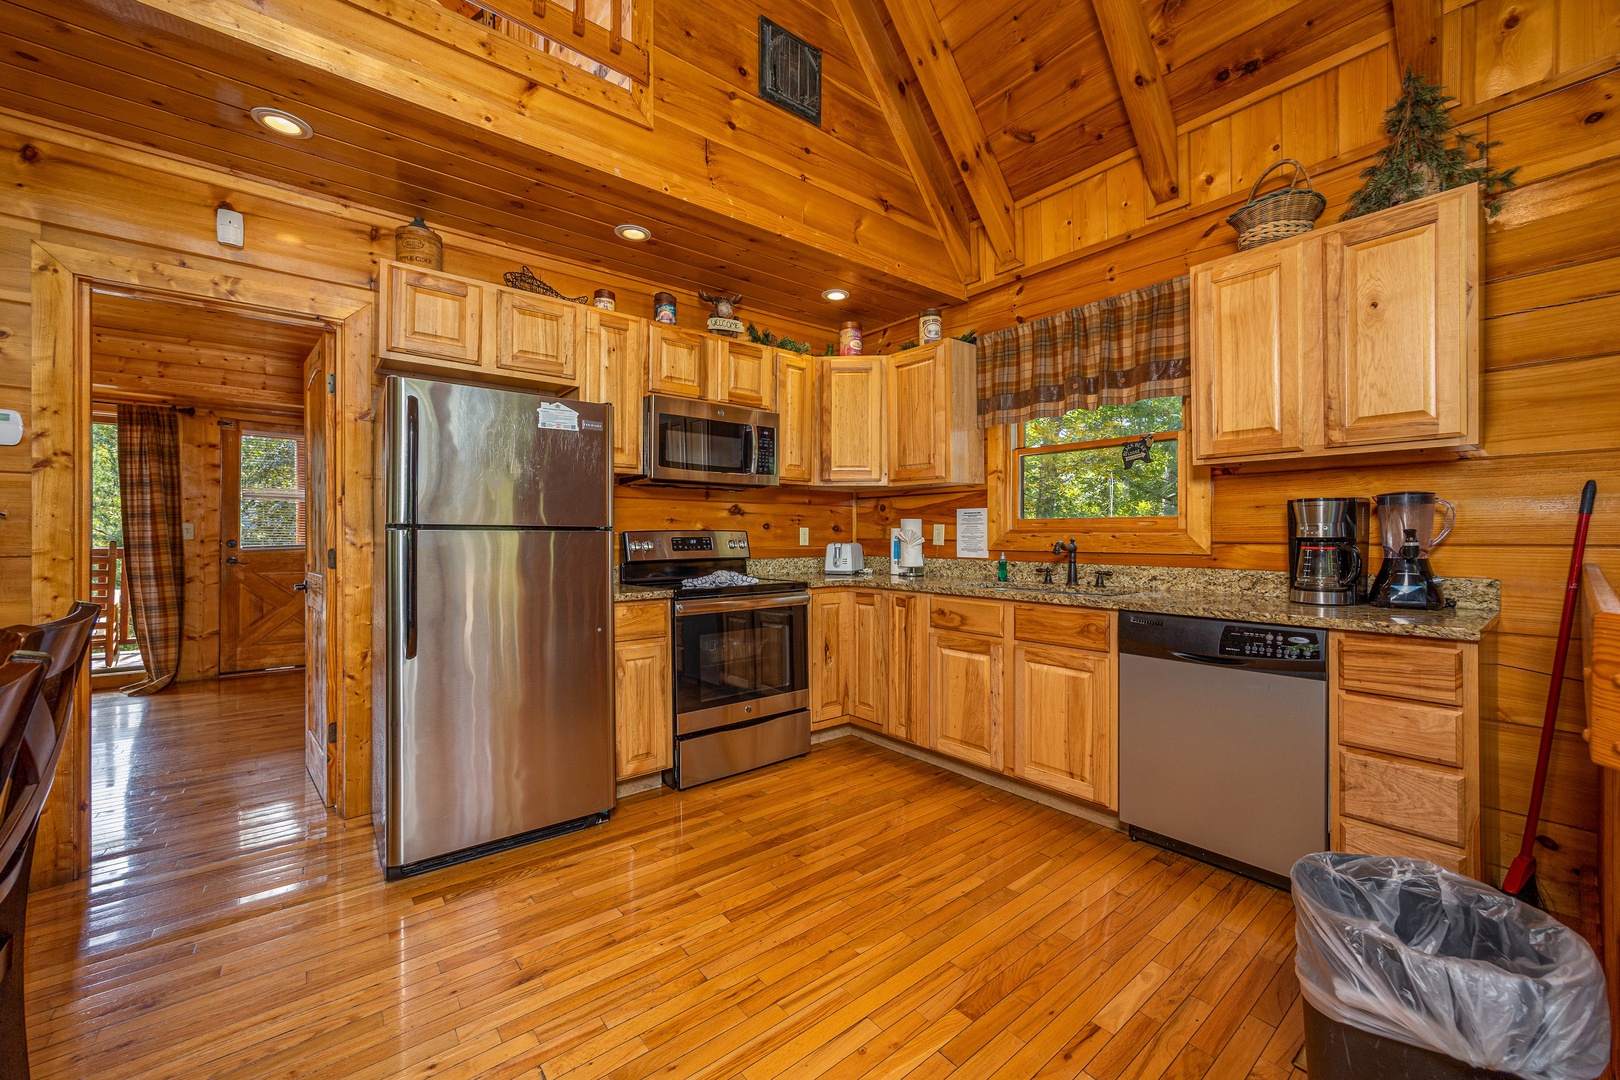 Kitchen appliances at The Great Outdoors, a 3 bedroom cabin rental located in Pigeon Forge